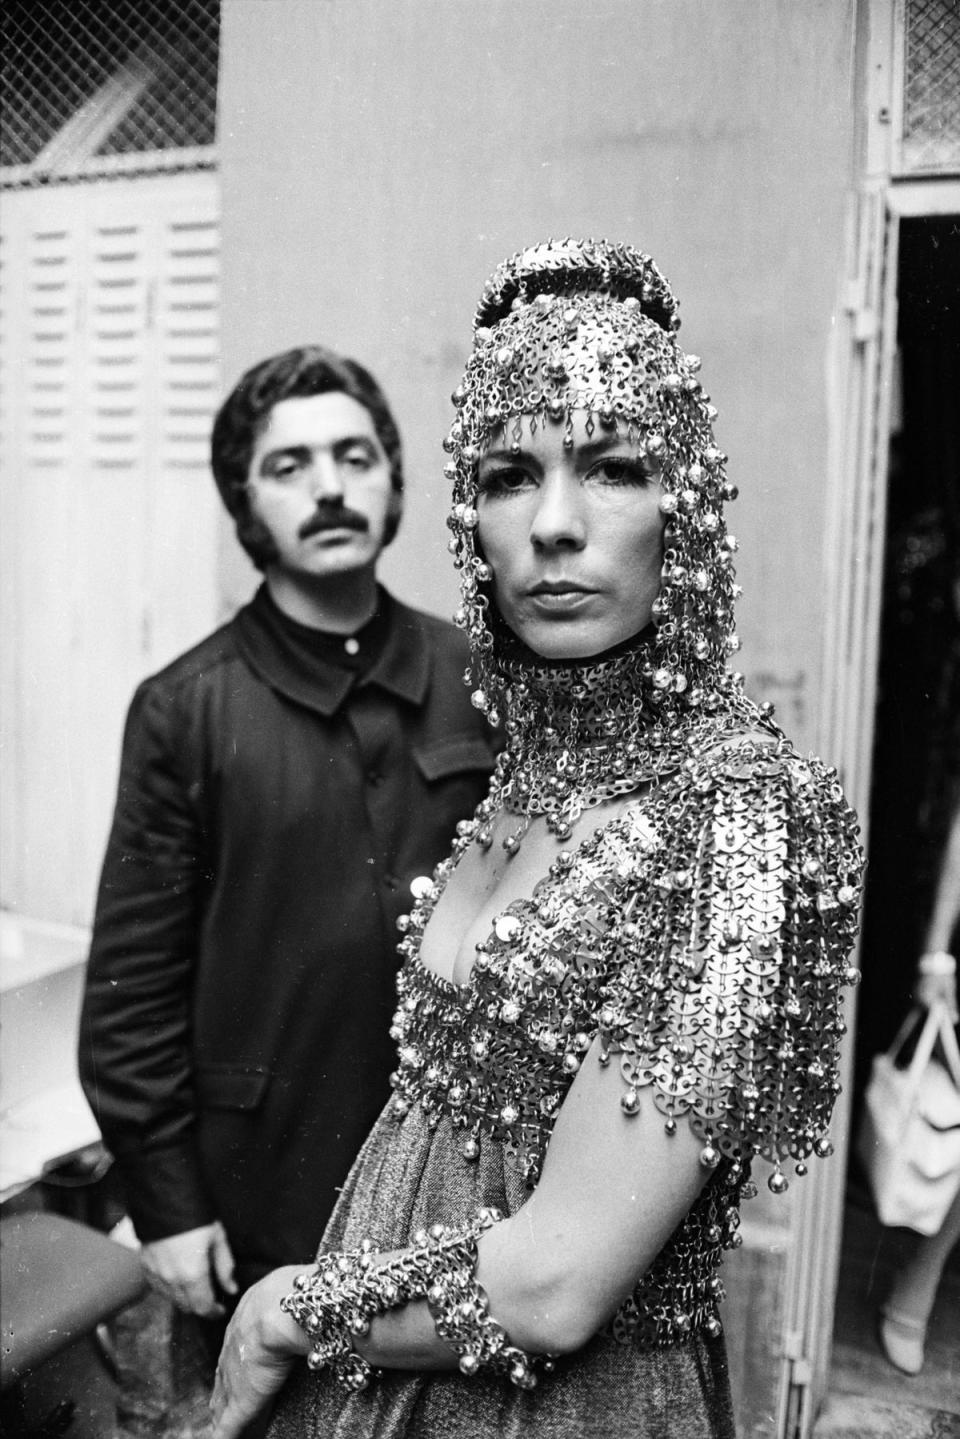 Spanish fashion designer Paco Rabanne with model Isabel Feldel, who is wearing one of his elaborate metallic creations in 1967 (Getty Images)